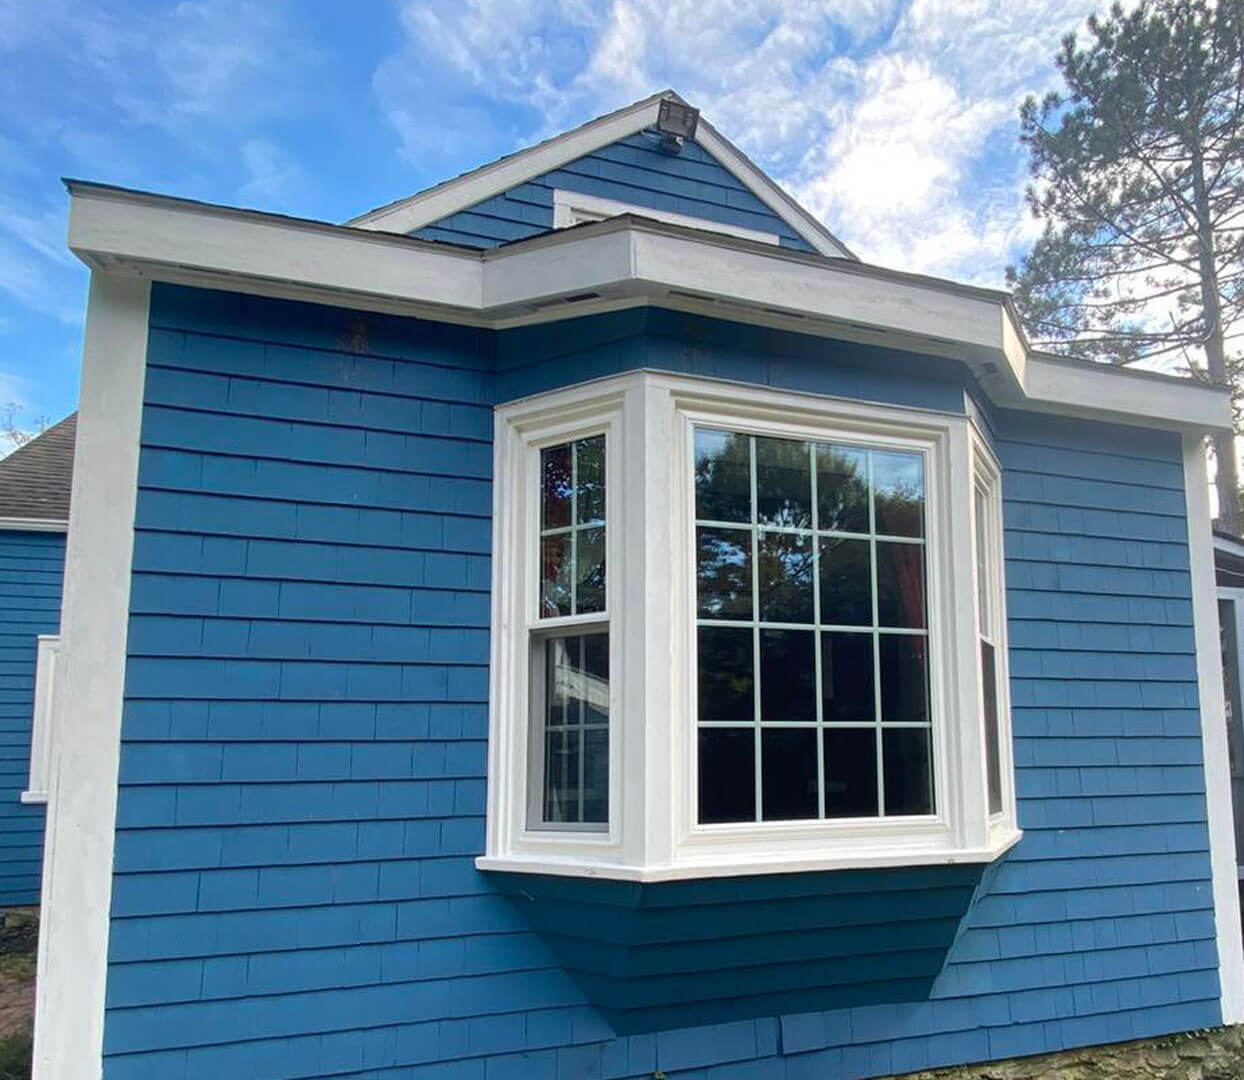 Exterior view of a SoftLite bay window